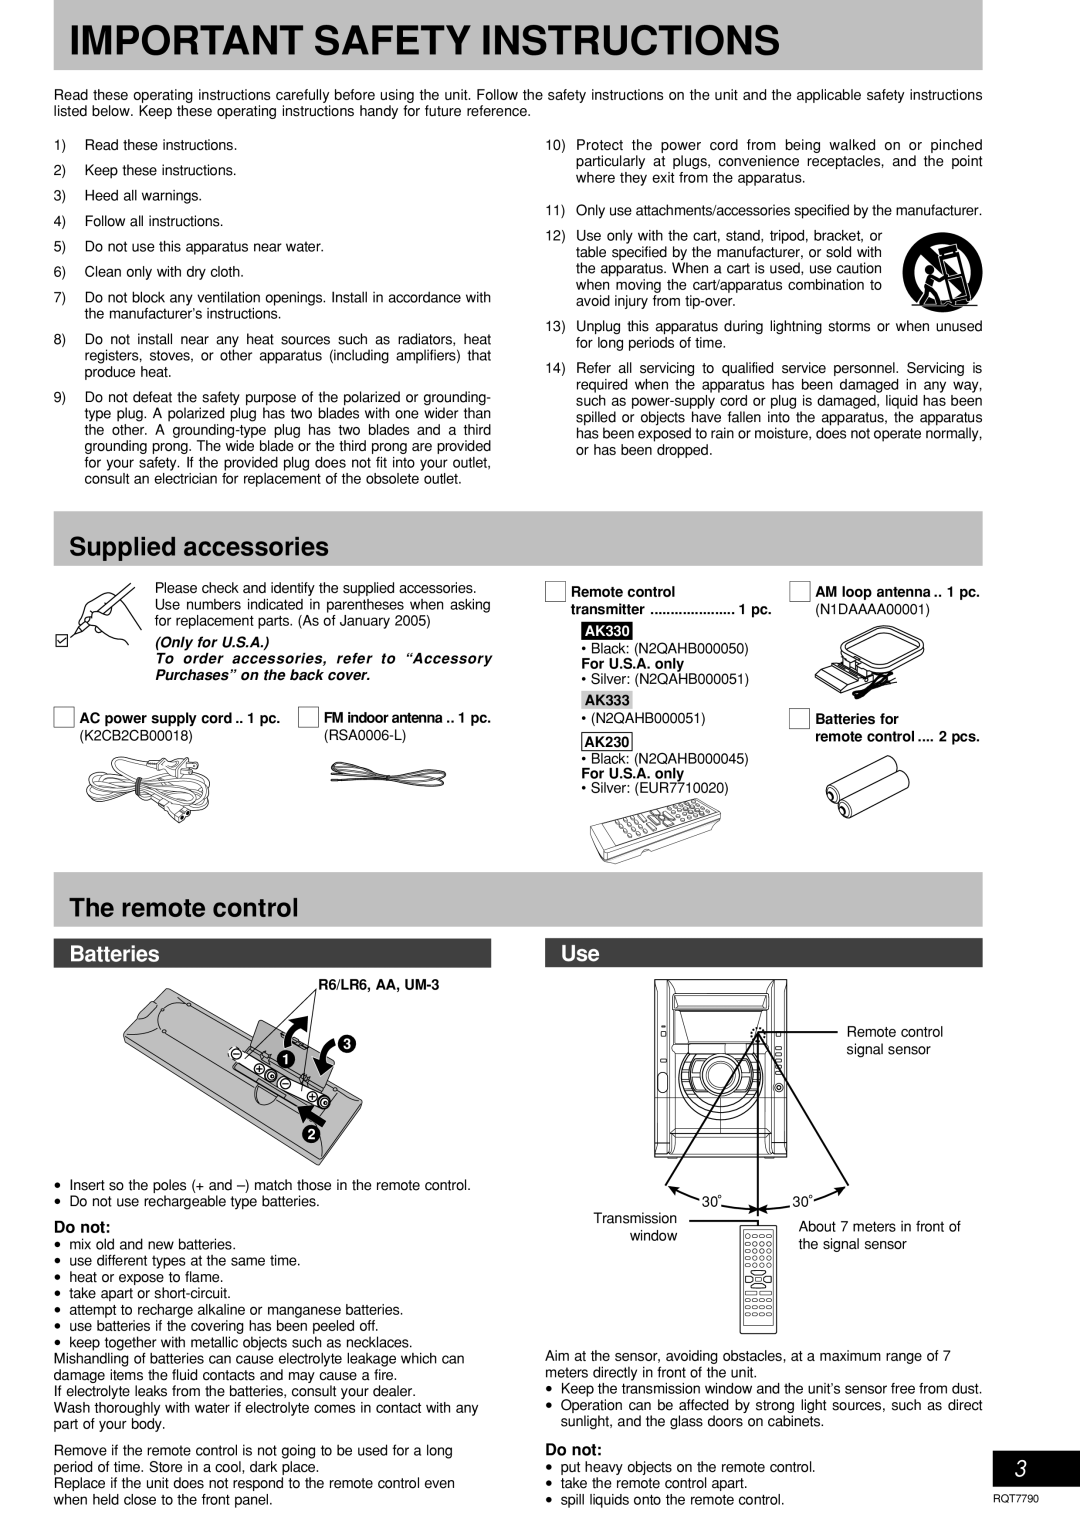 Panasonic SC-AK333 Supplied accessories, The remote control, Batteries, Important Safety Instructions, Only for U.S.A 